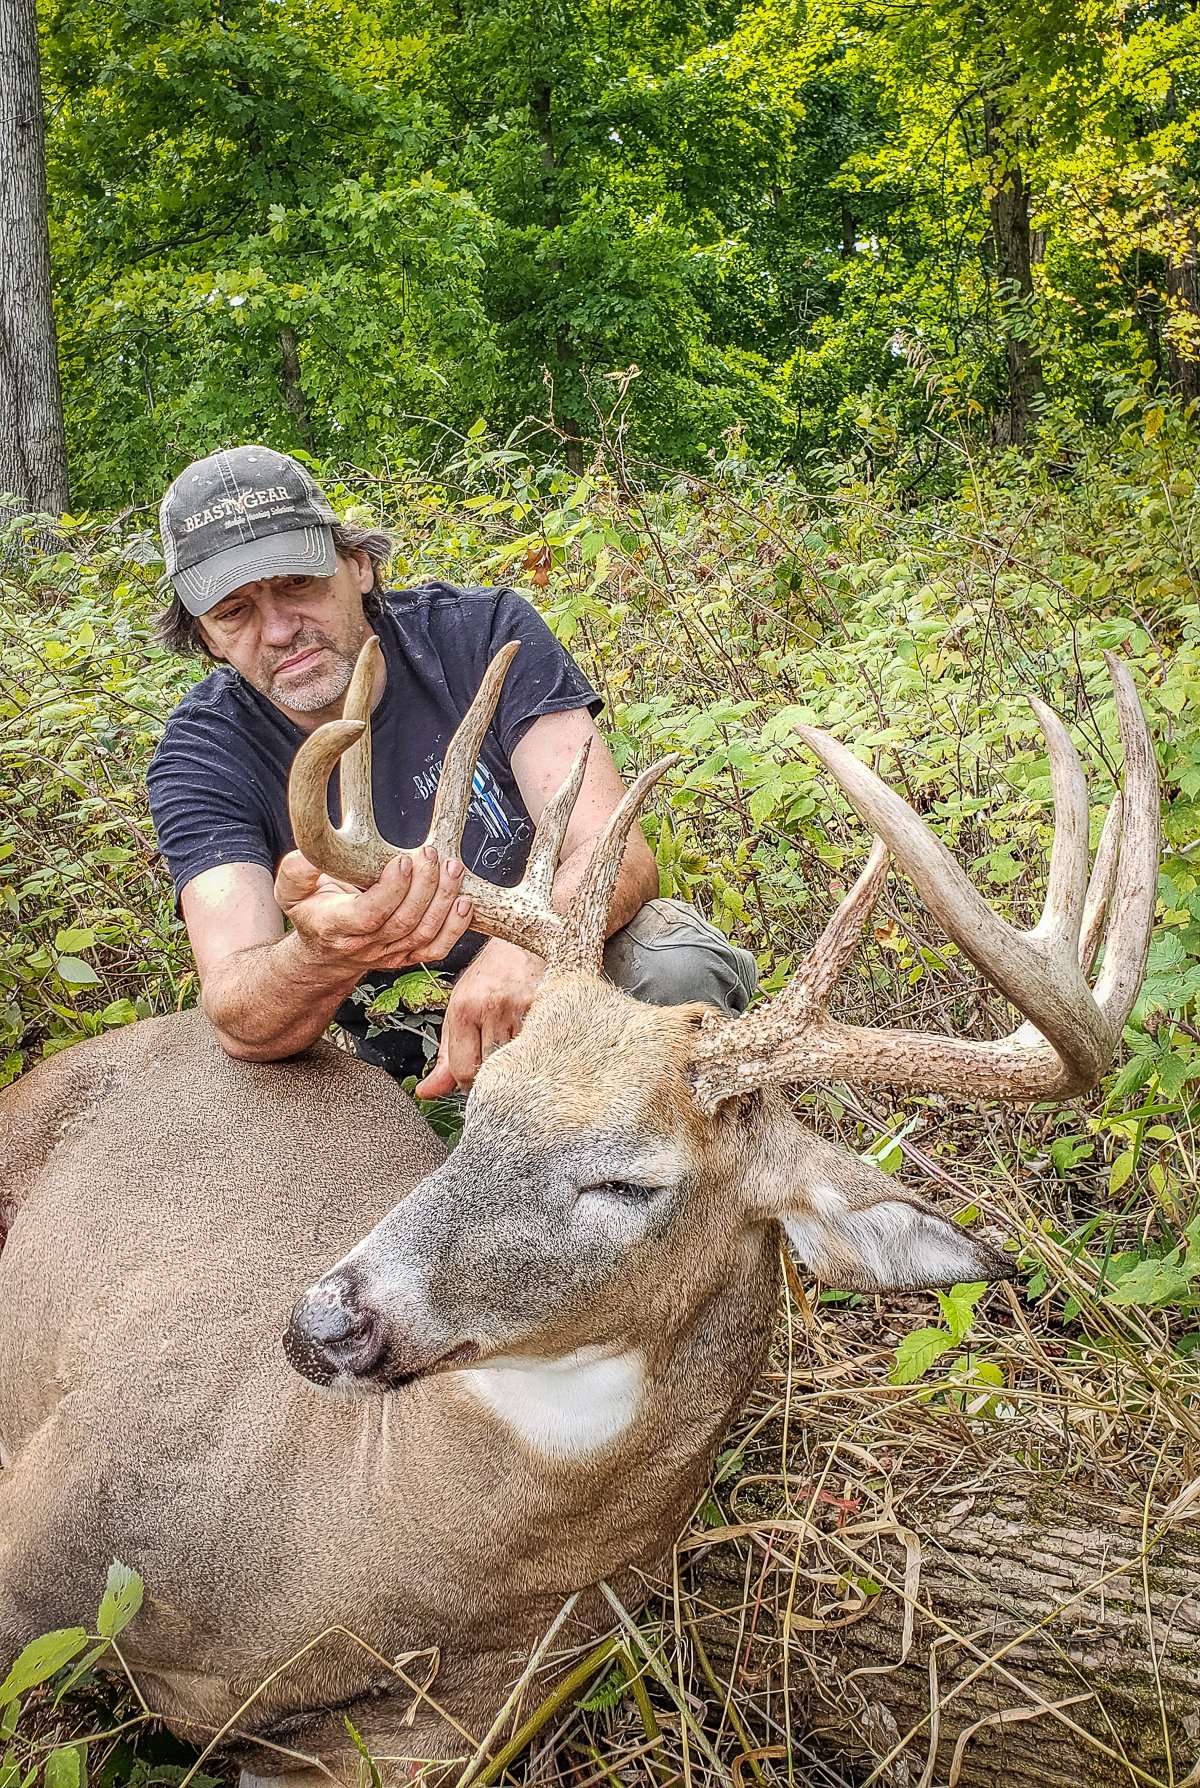 This buck lived out its many days in a large swampy area. Image courtesy of Dan Infalt